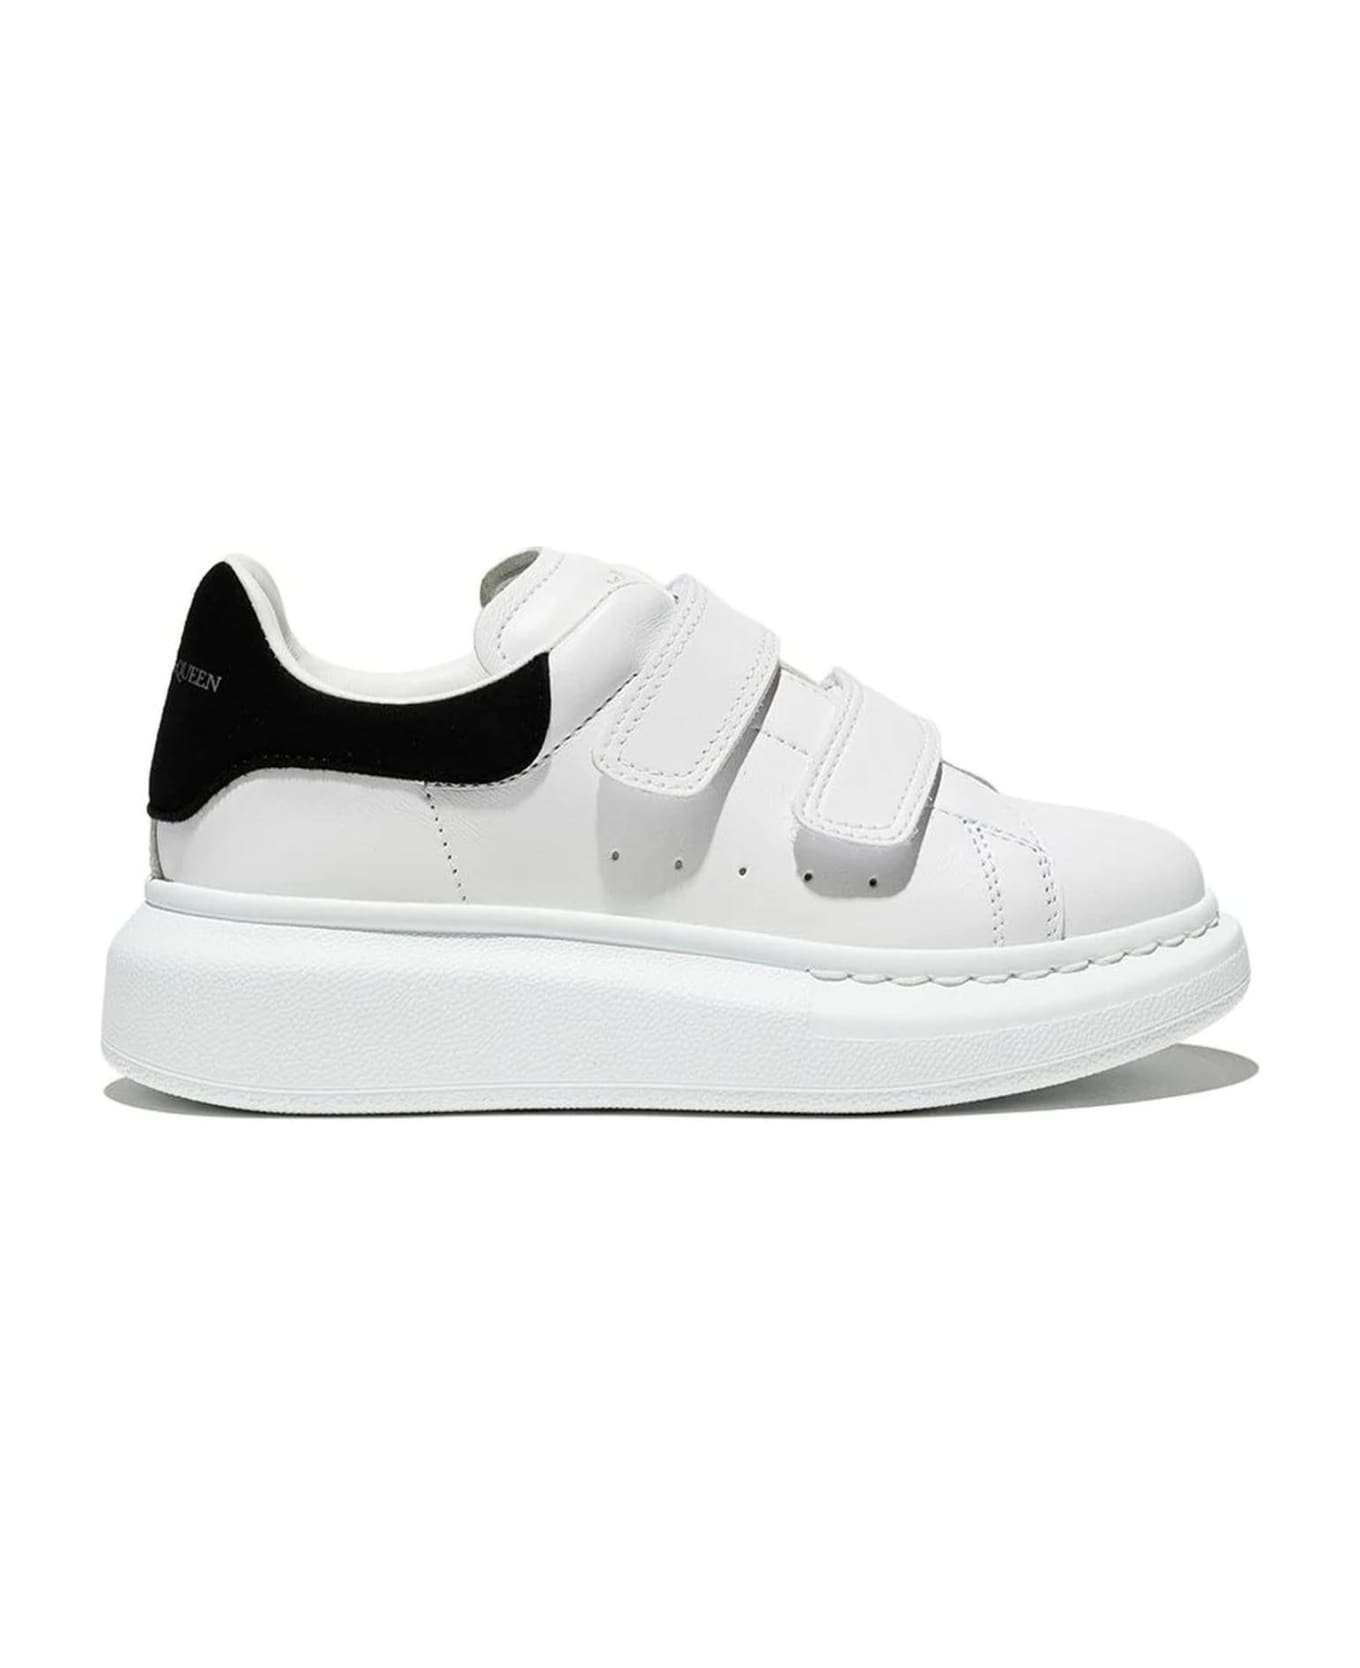 Alexander McQueen White Leather Sneakers - Bianco